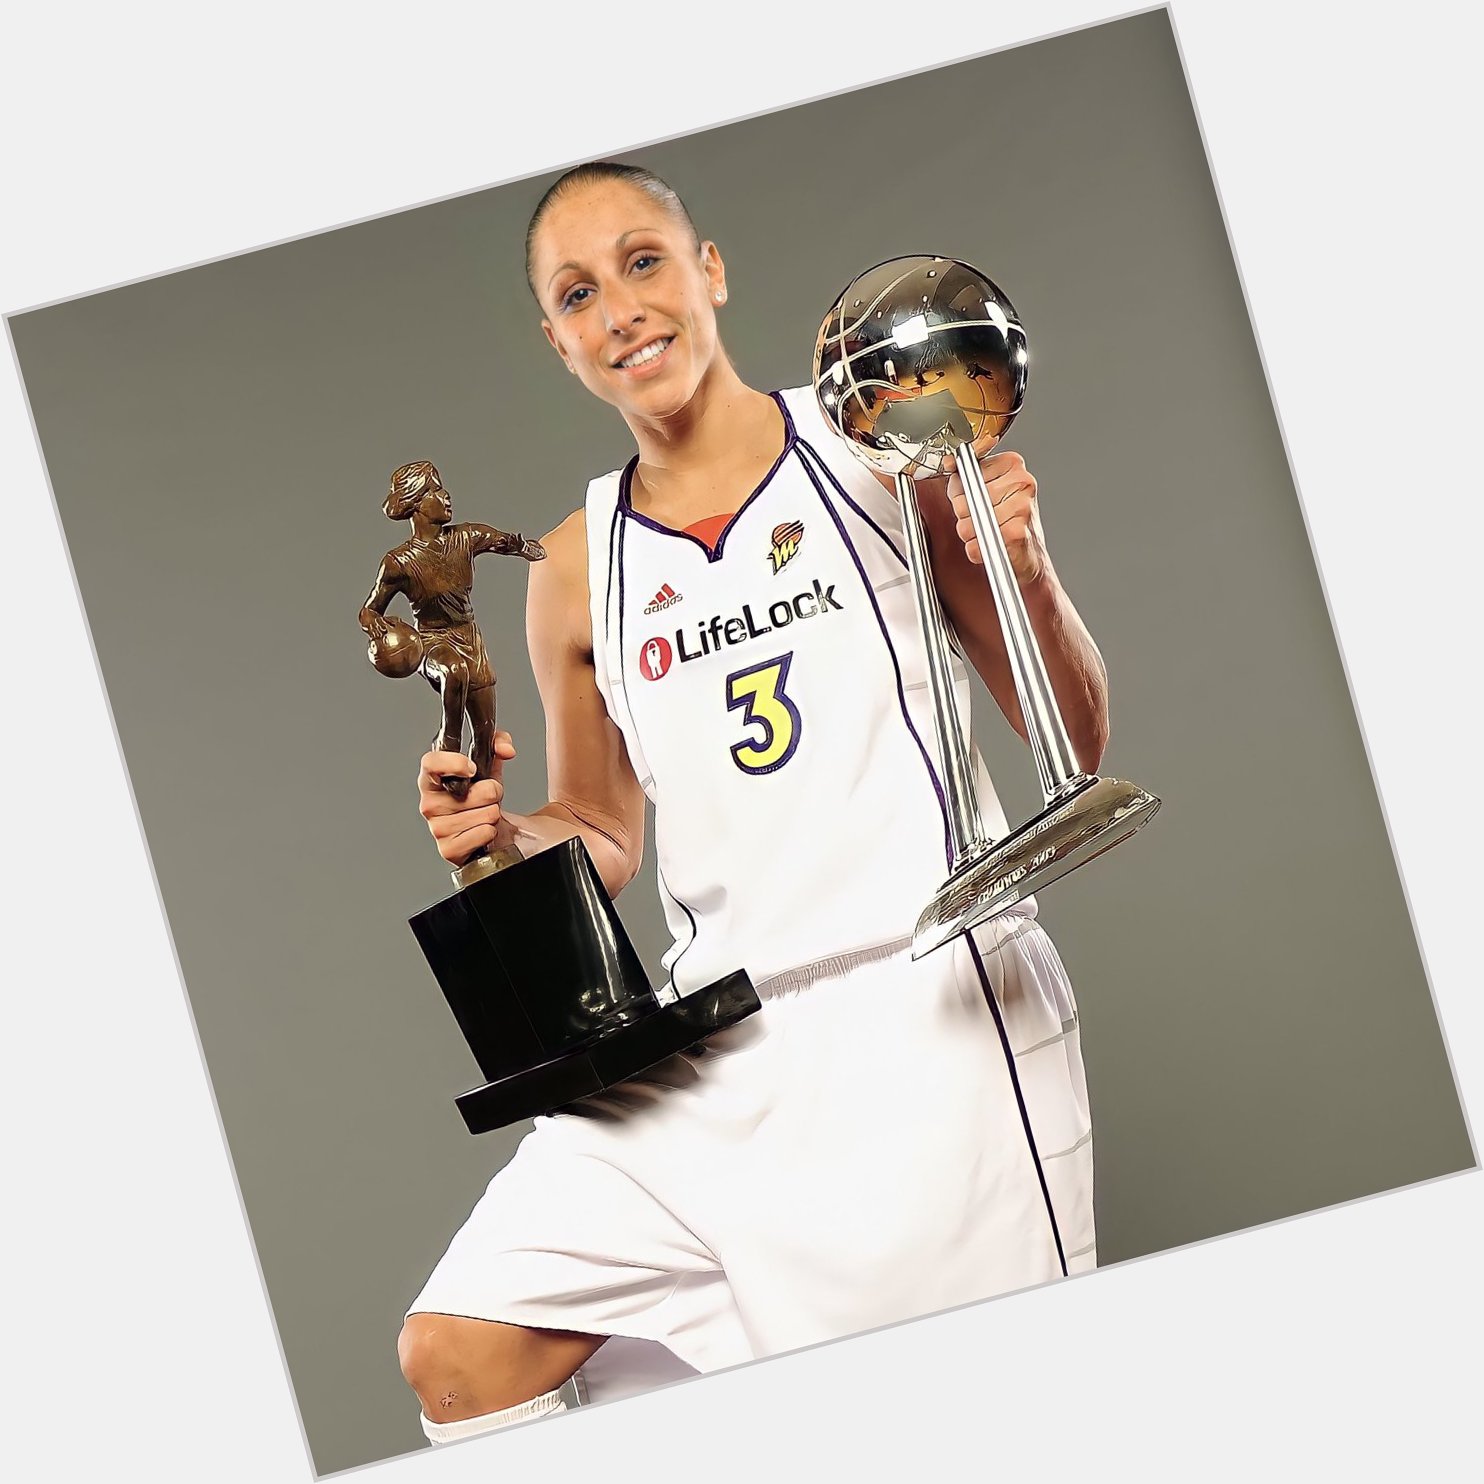 Happy birthday to one of the best BASKETBALL PLAYERS EVER, the one and only Diana Taurasi 